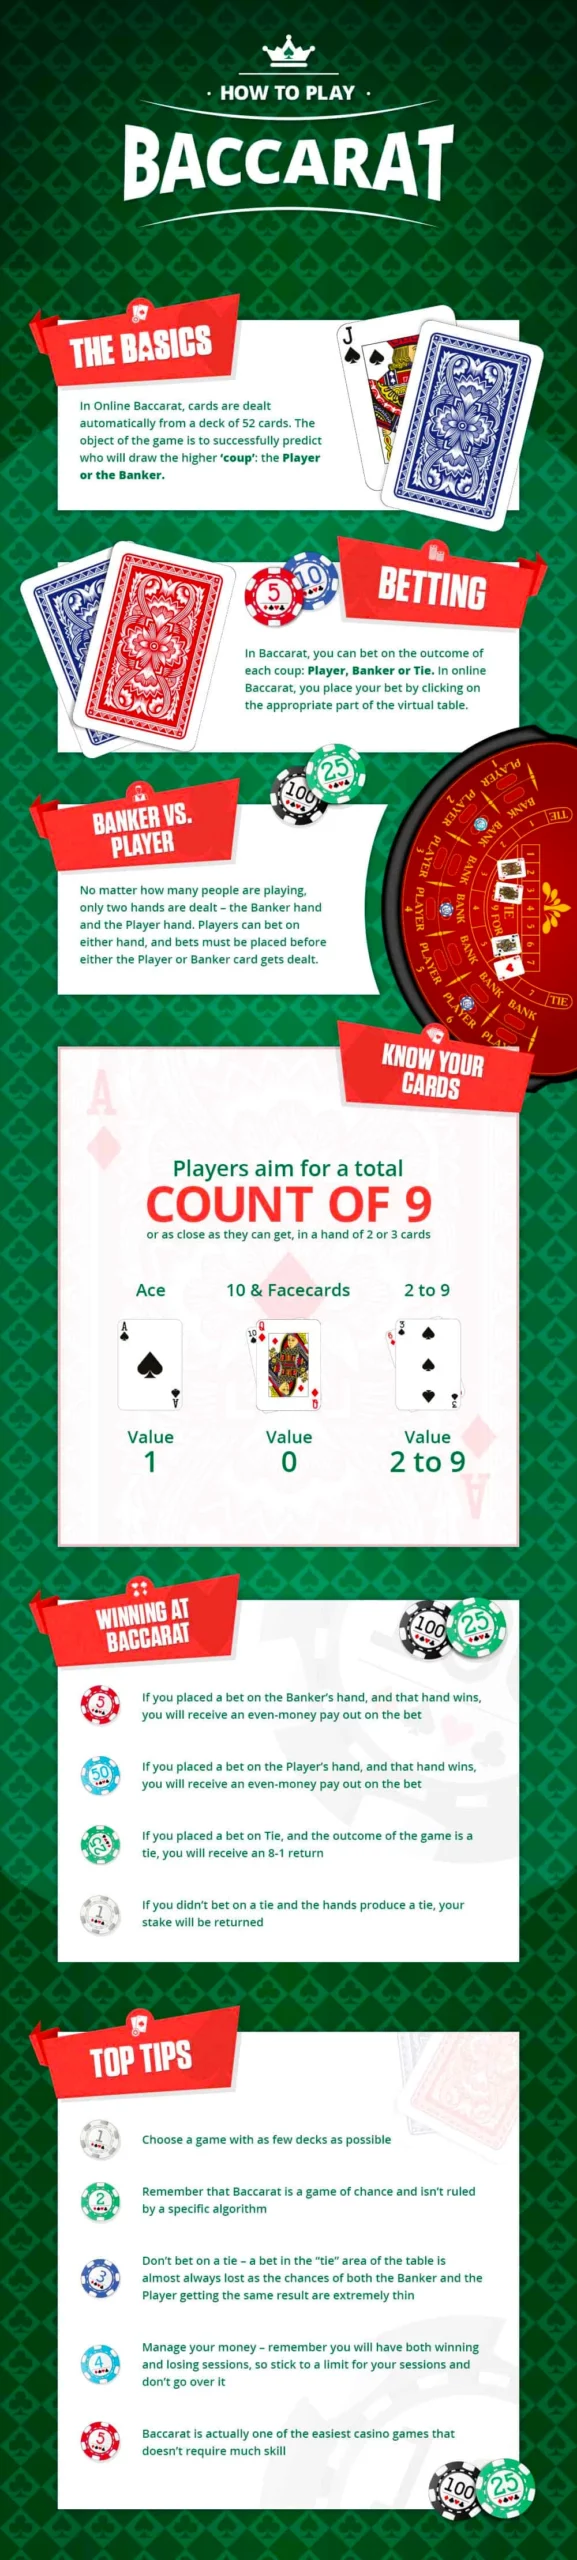 How to Play Baccarat Rules Infographic